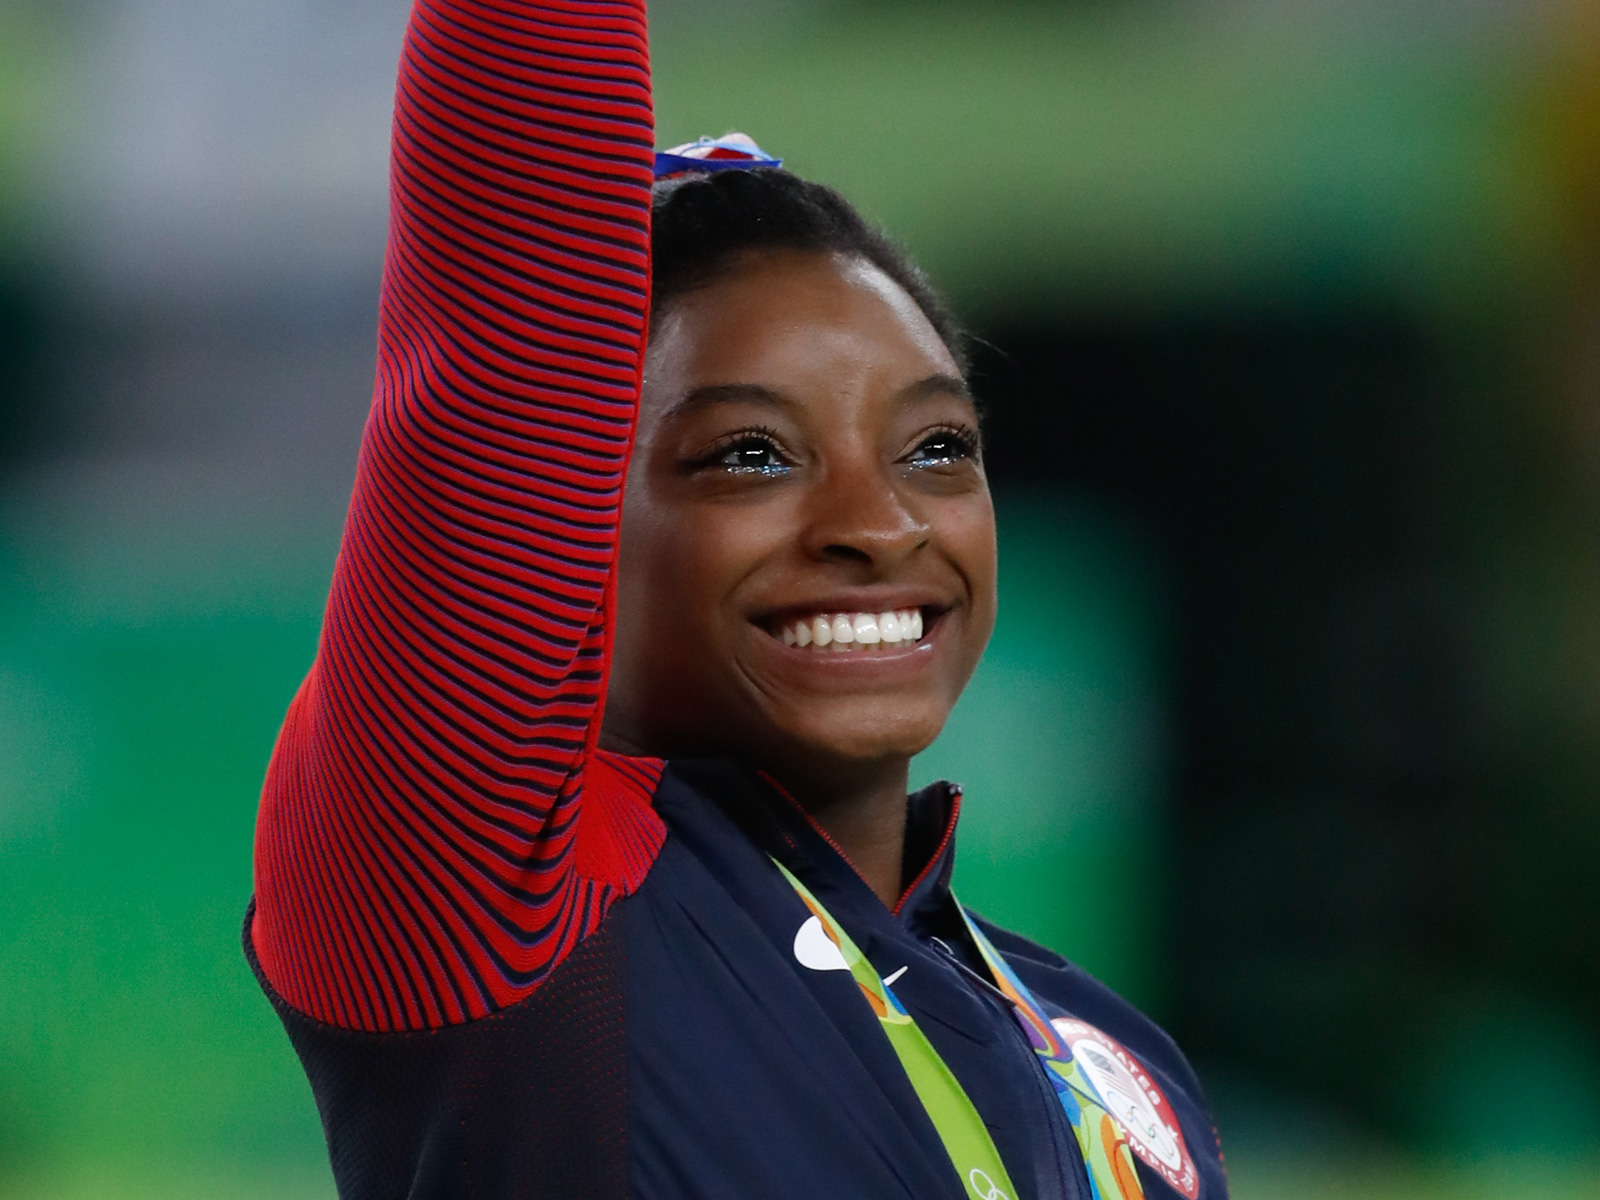 File:Simone Biles at the 2016 Olympics all-around gold medal podium  (28262782114) cropped.jpg - Wikimedia Commons